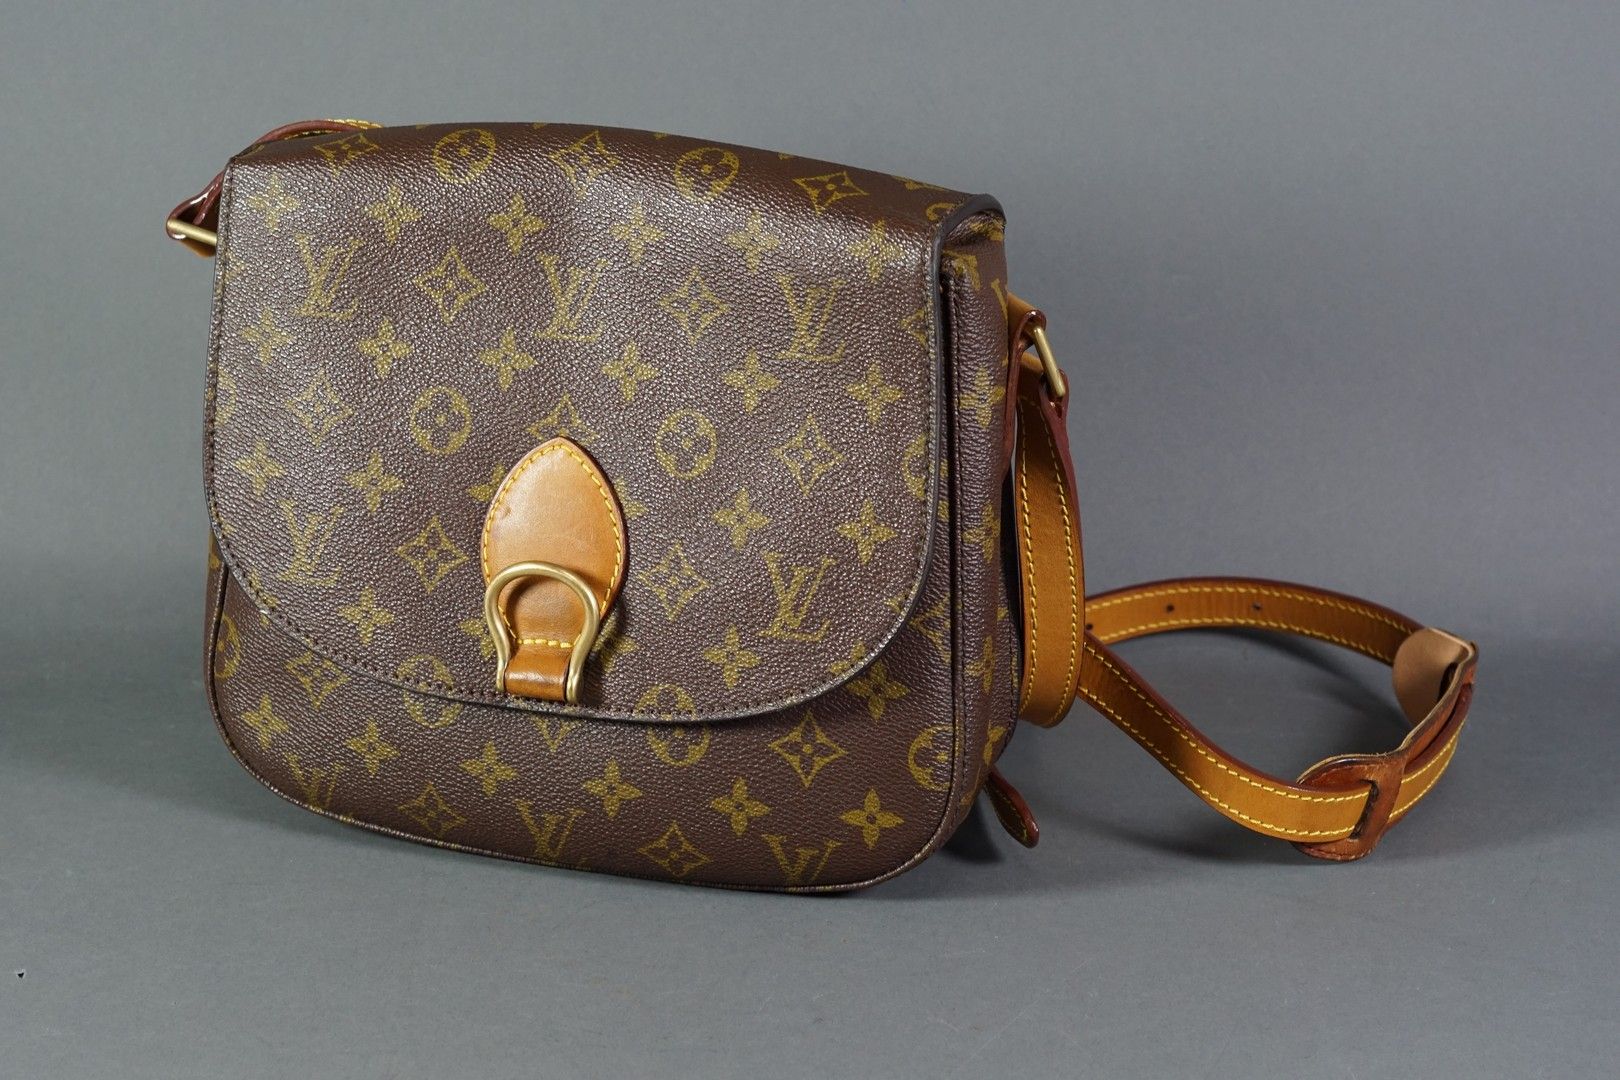 LOUIS VUITTON Saint Cloud" bag, in monogrammed canvas and natural leather, adjus&hellip;